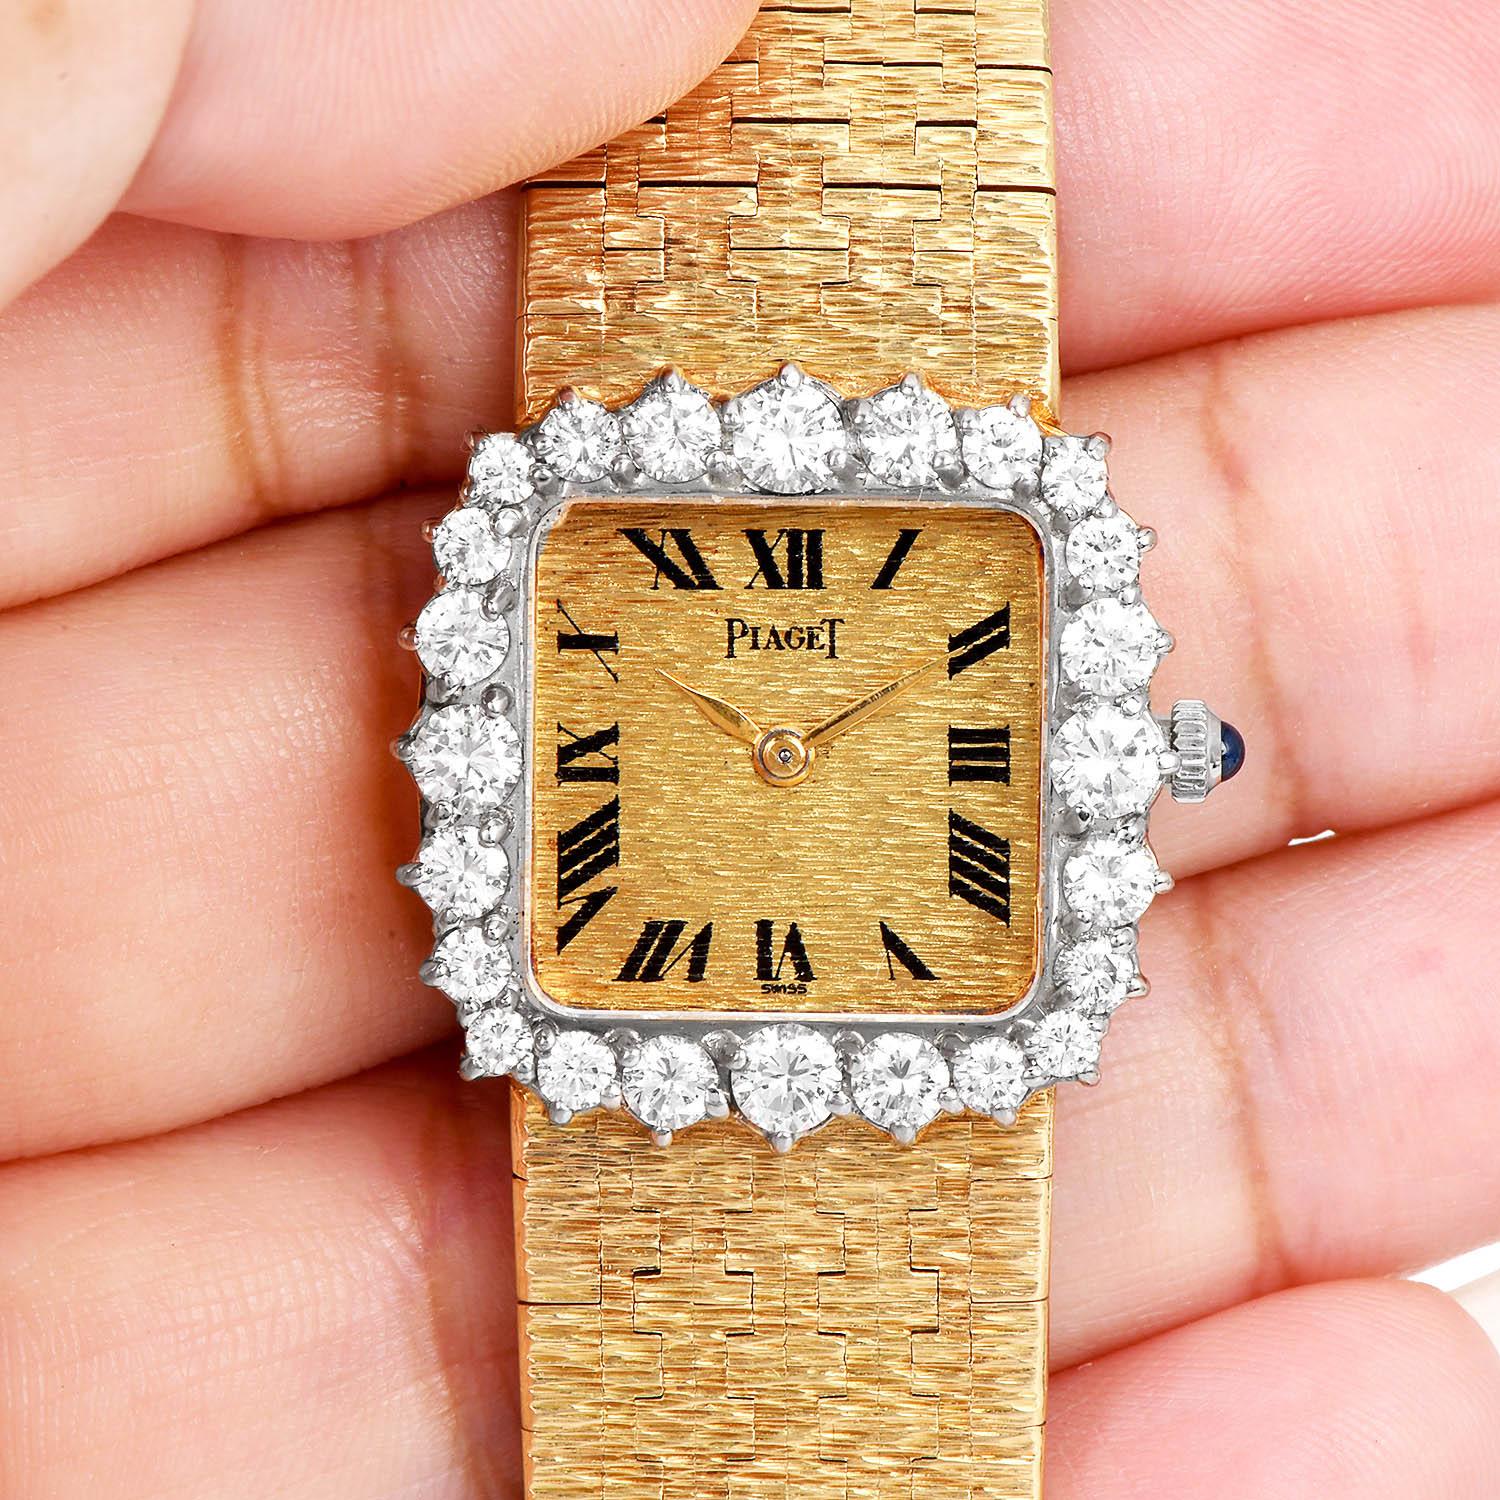 Piaget Vintage Diamond 18K Yellow Gold Bark Bracelet Watch In Excellent Condition For Sale In Miami, FL